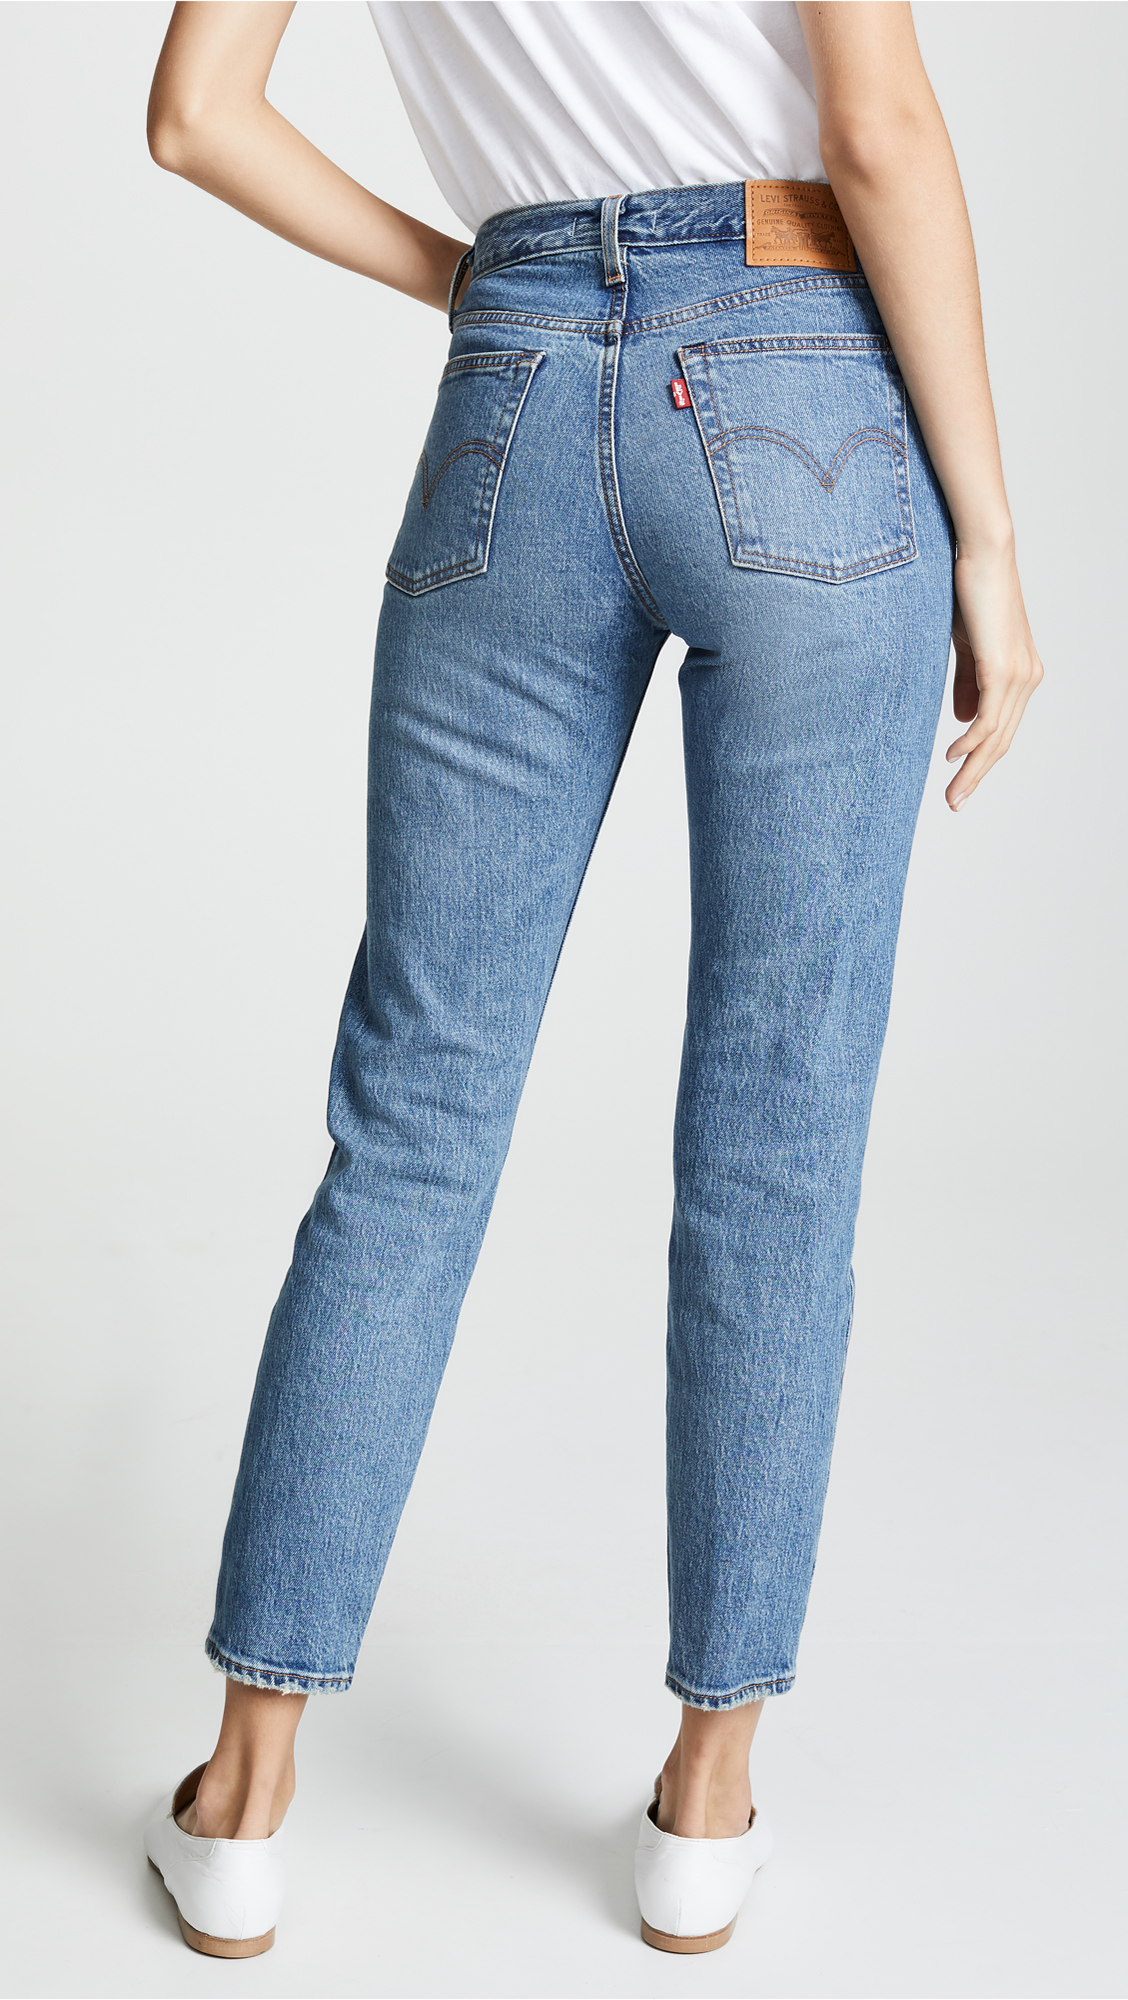 jeans that give you shape